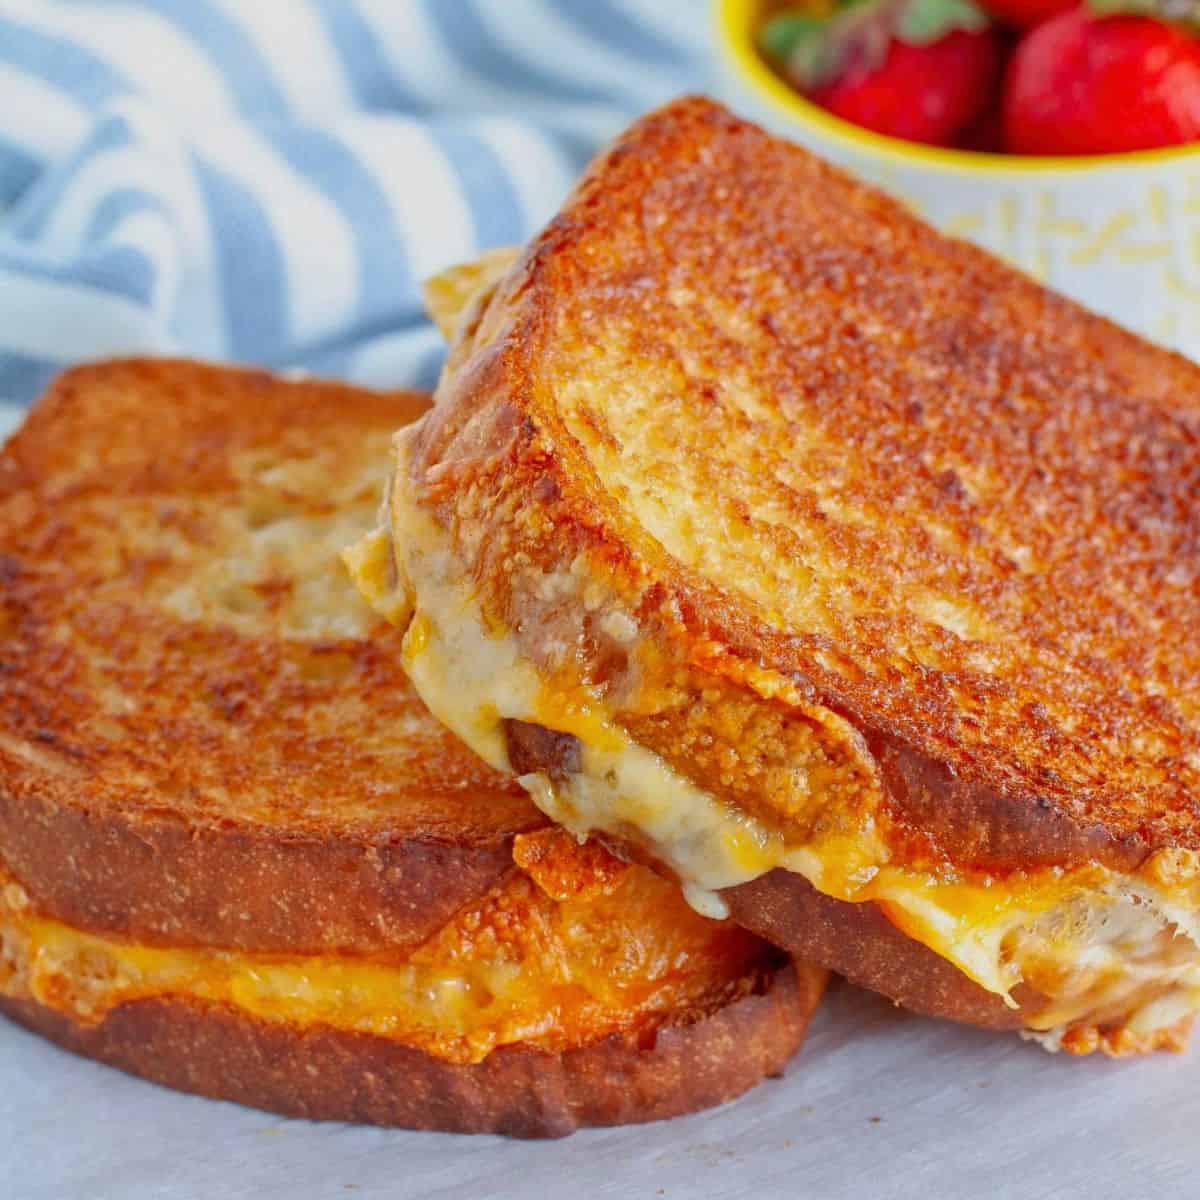 5. Grilled Cheese - Airfood Recipe